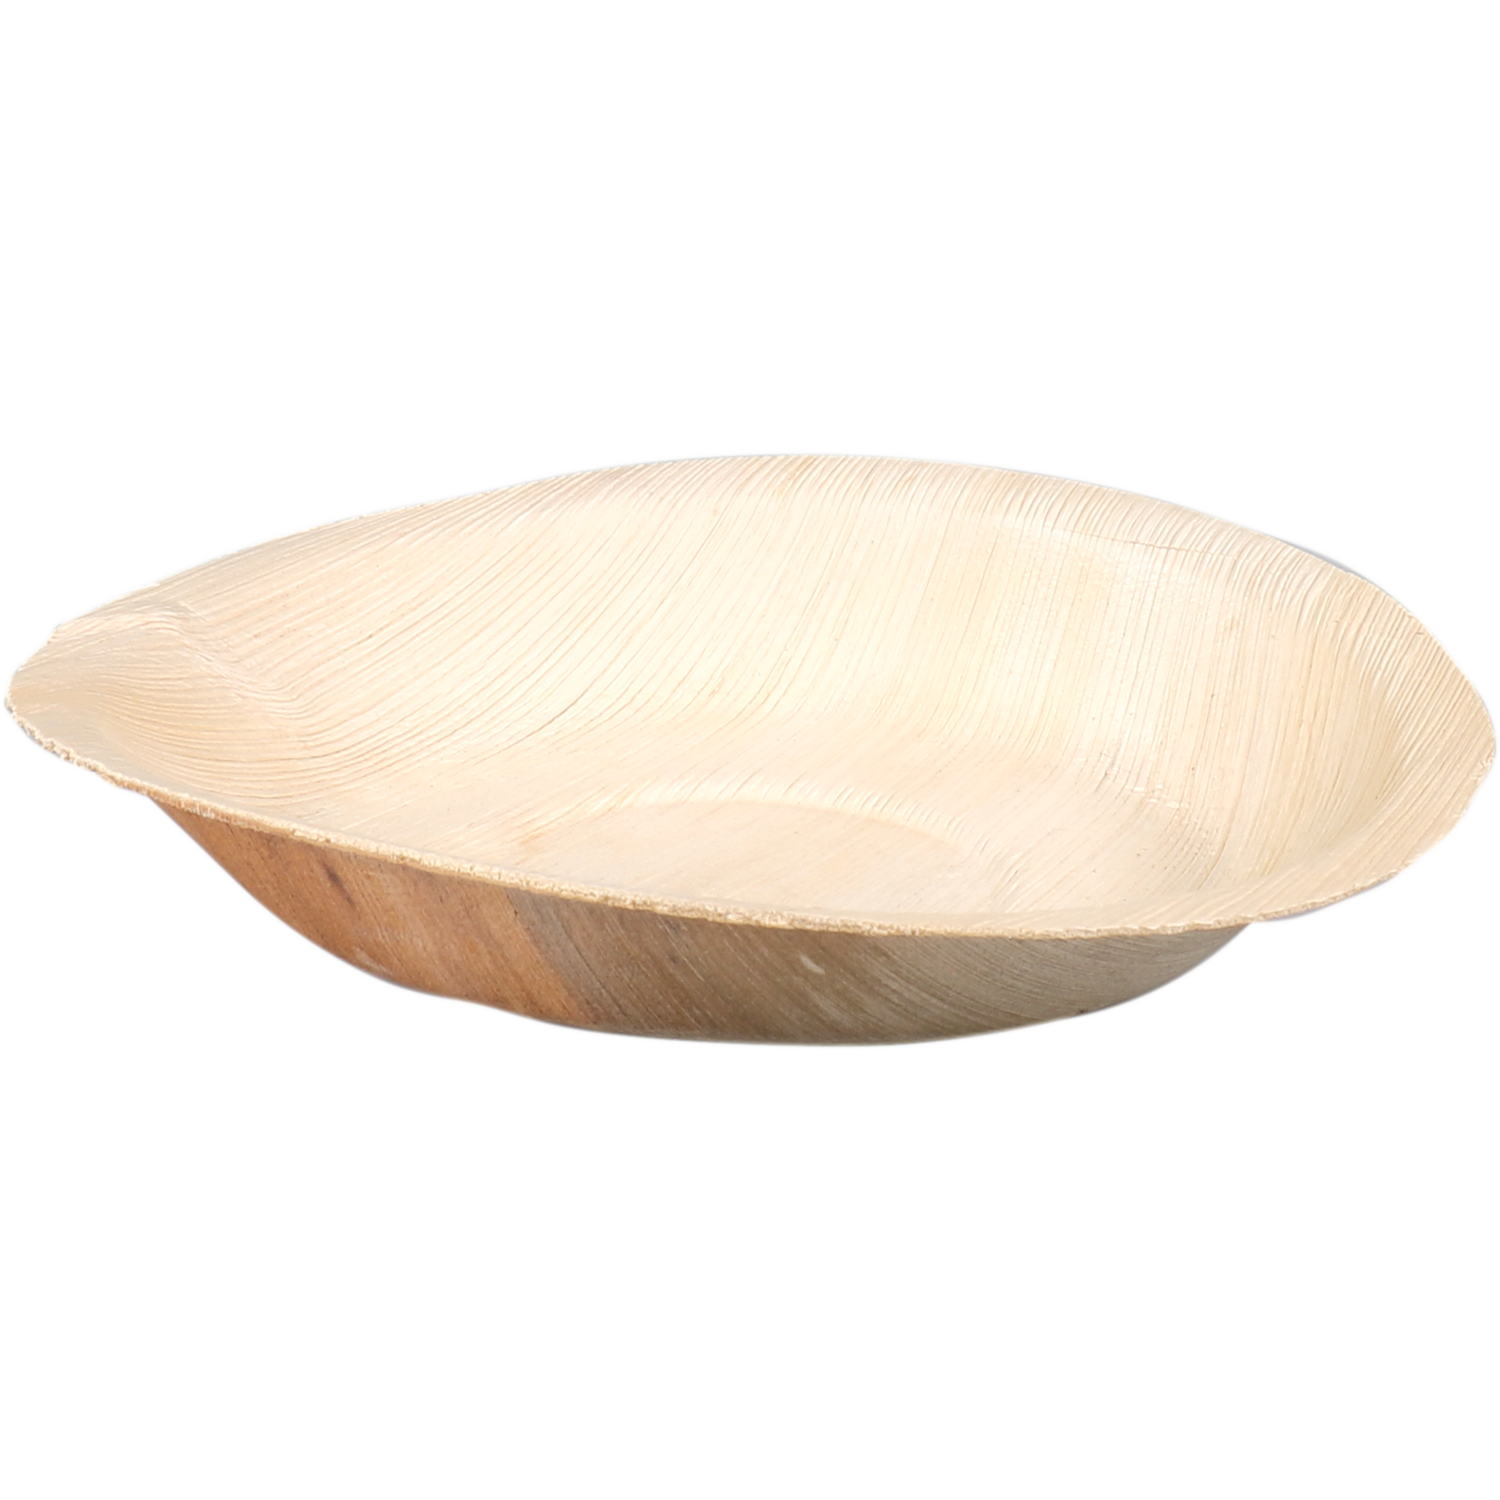 Depa® Plate, round, 1 compartment, palm leaves , Ø18cm, natural 1